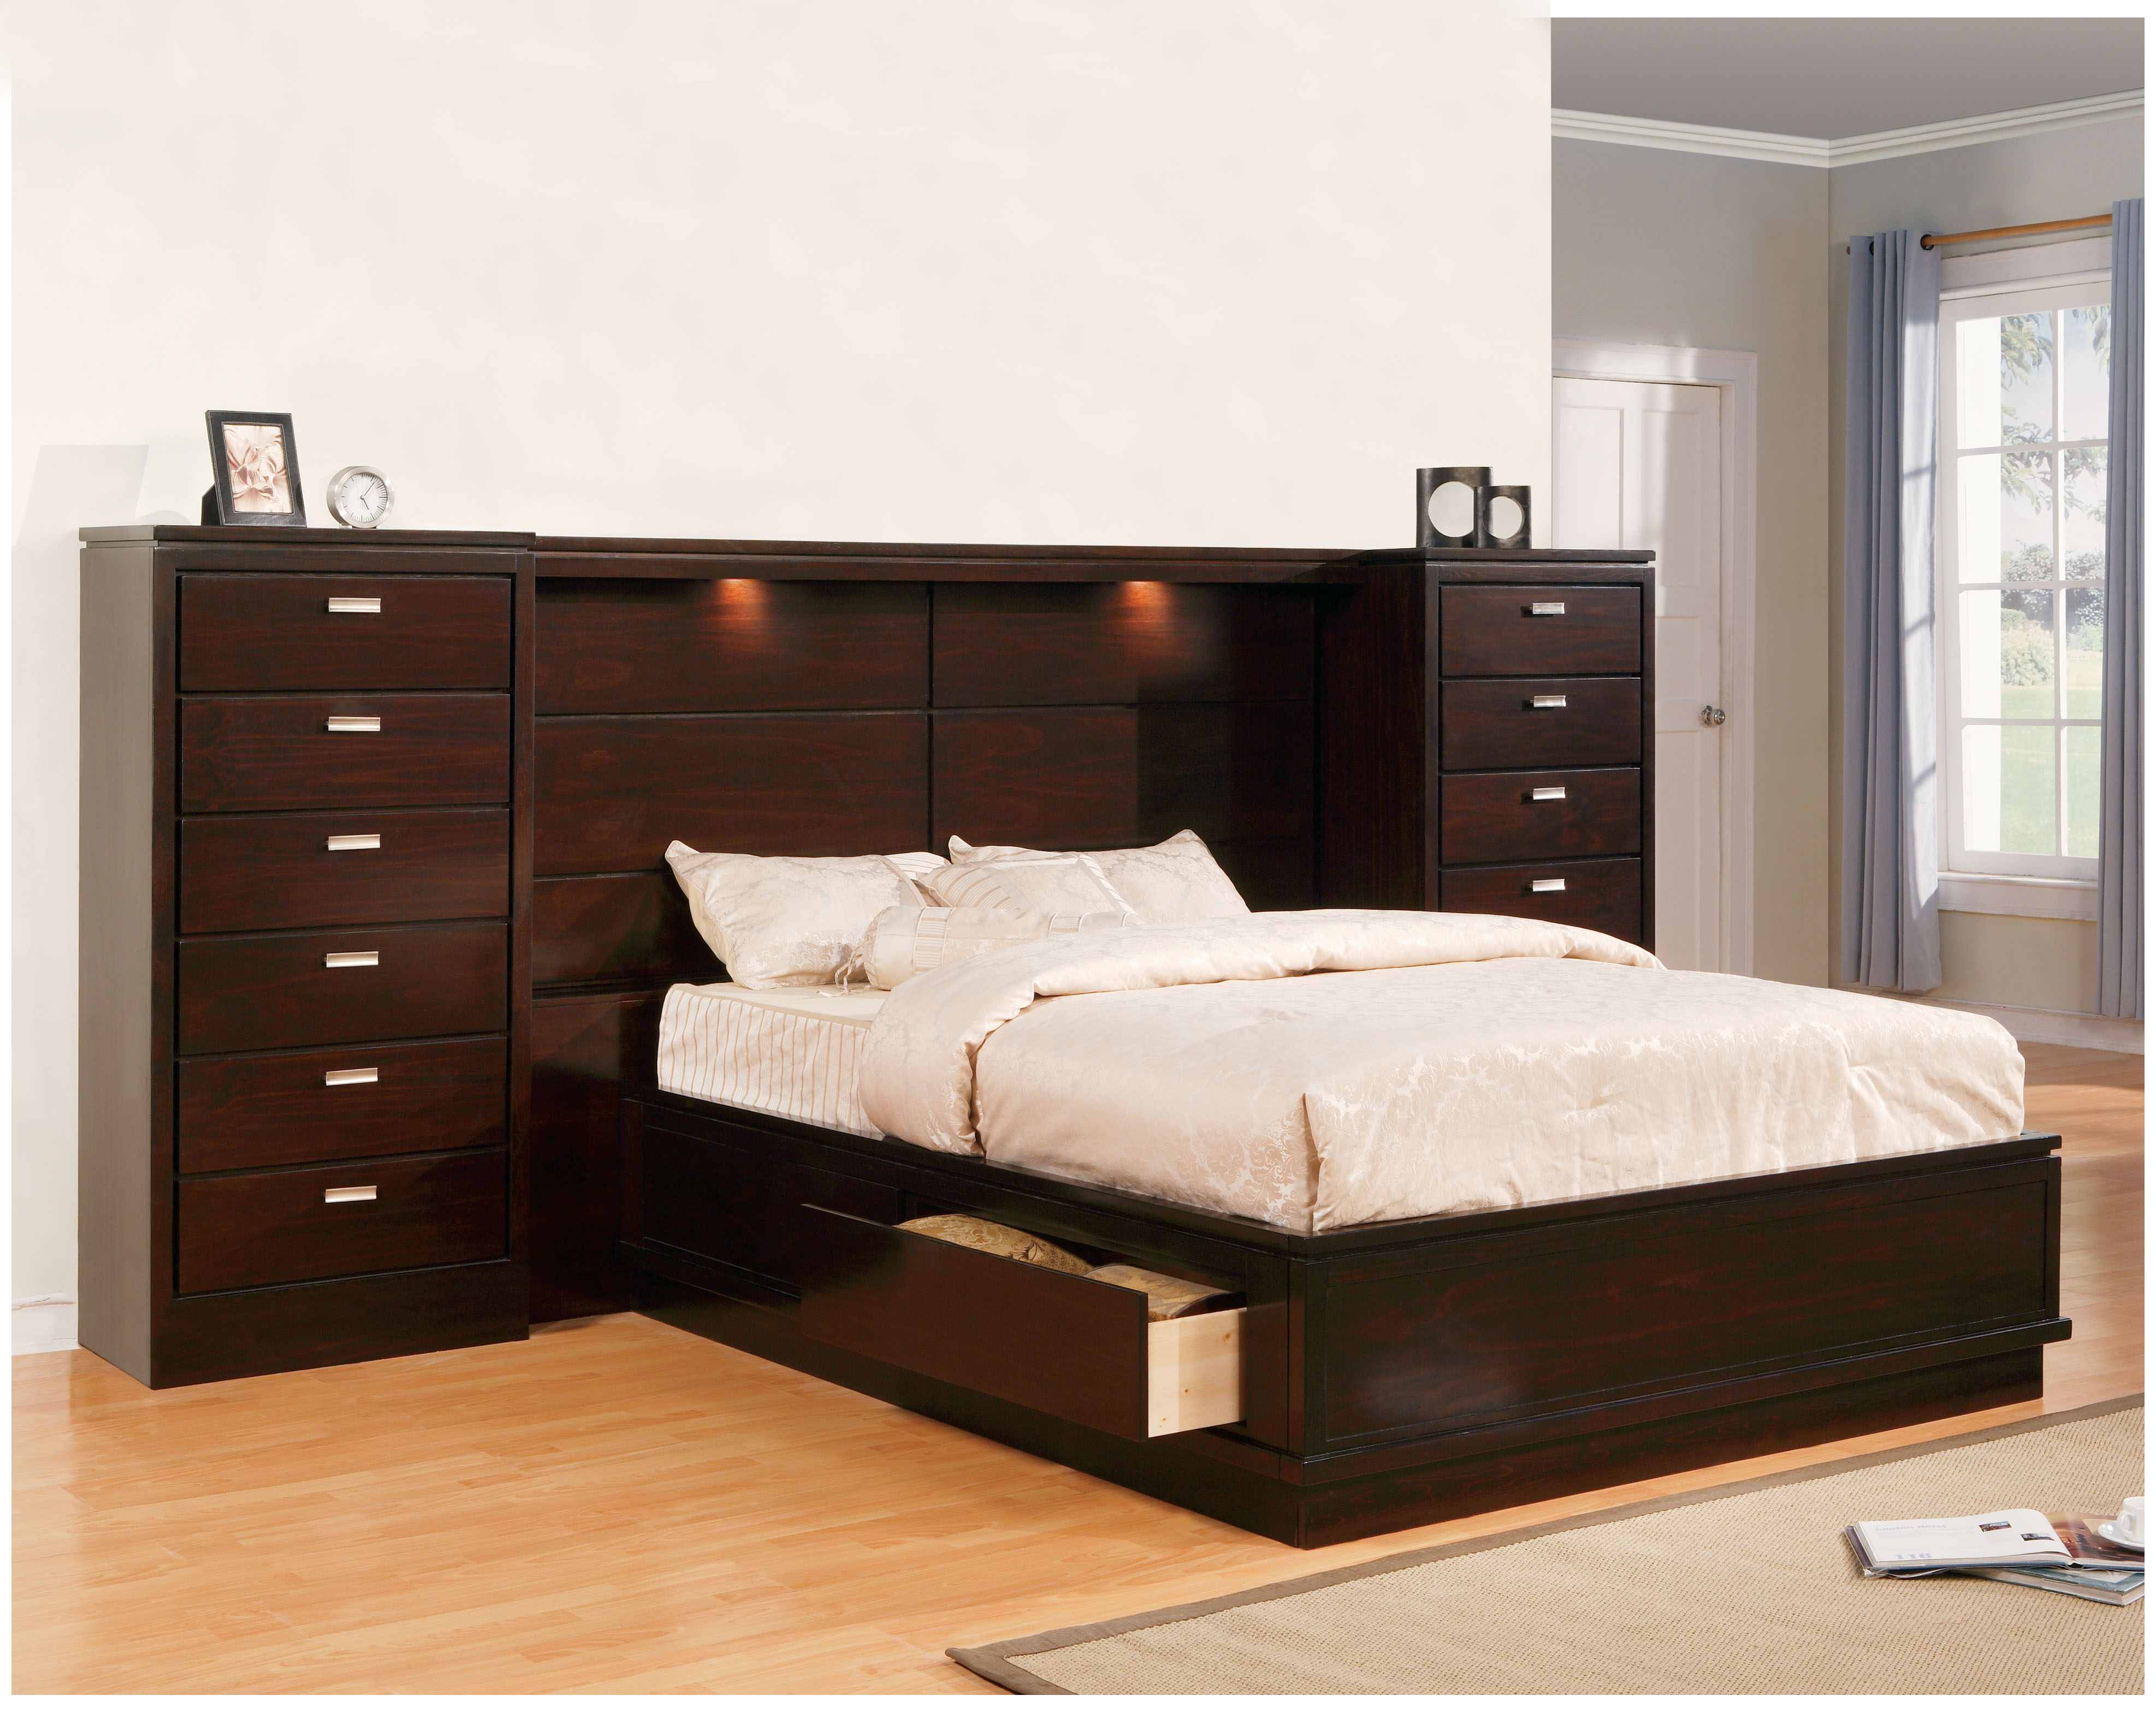 The Palms Bedroom Collection Set Overstock 3861590